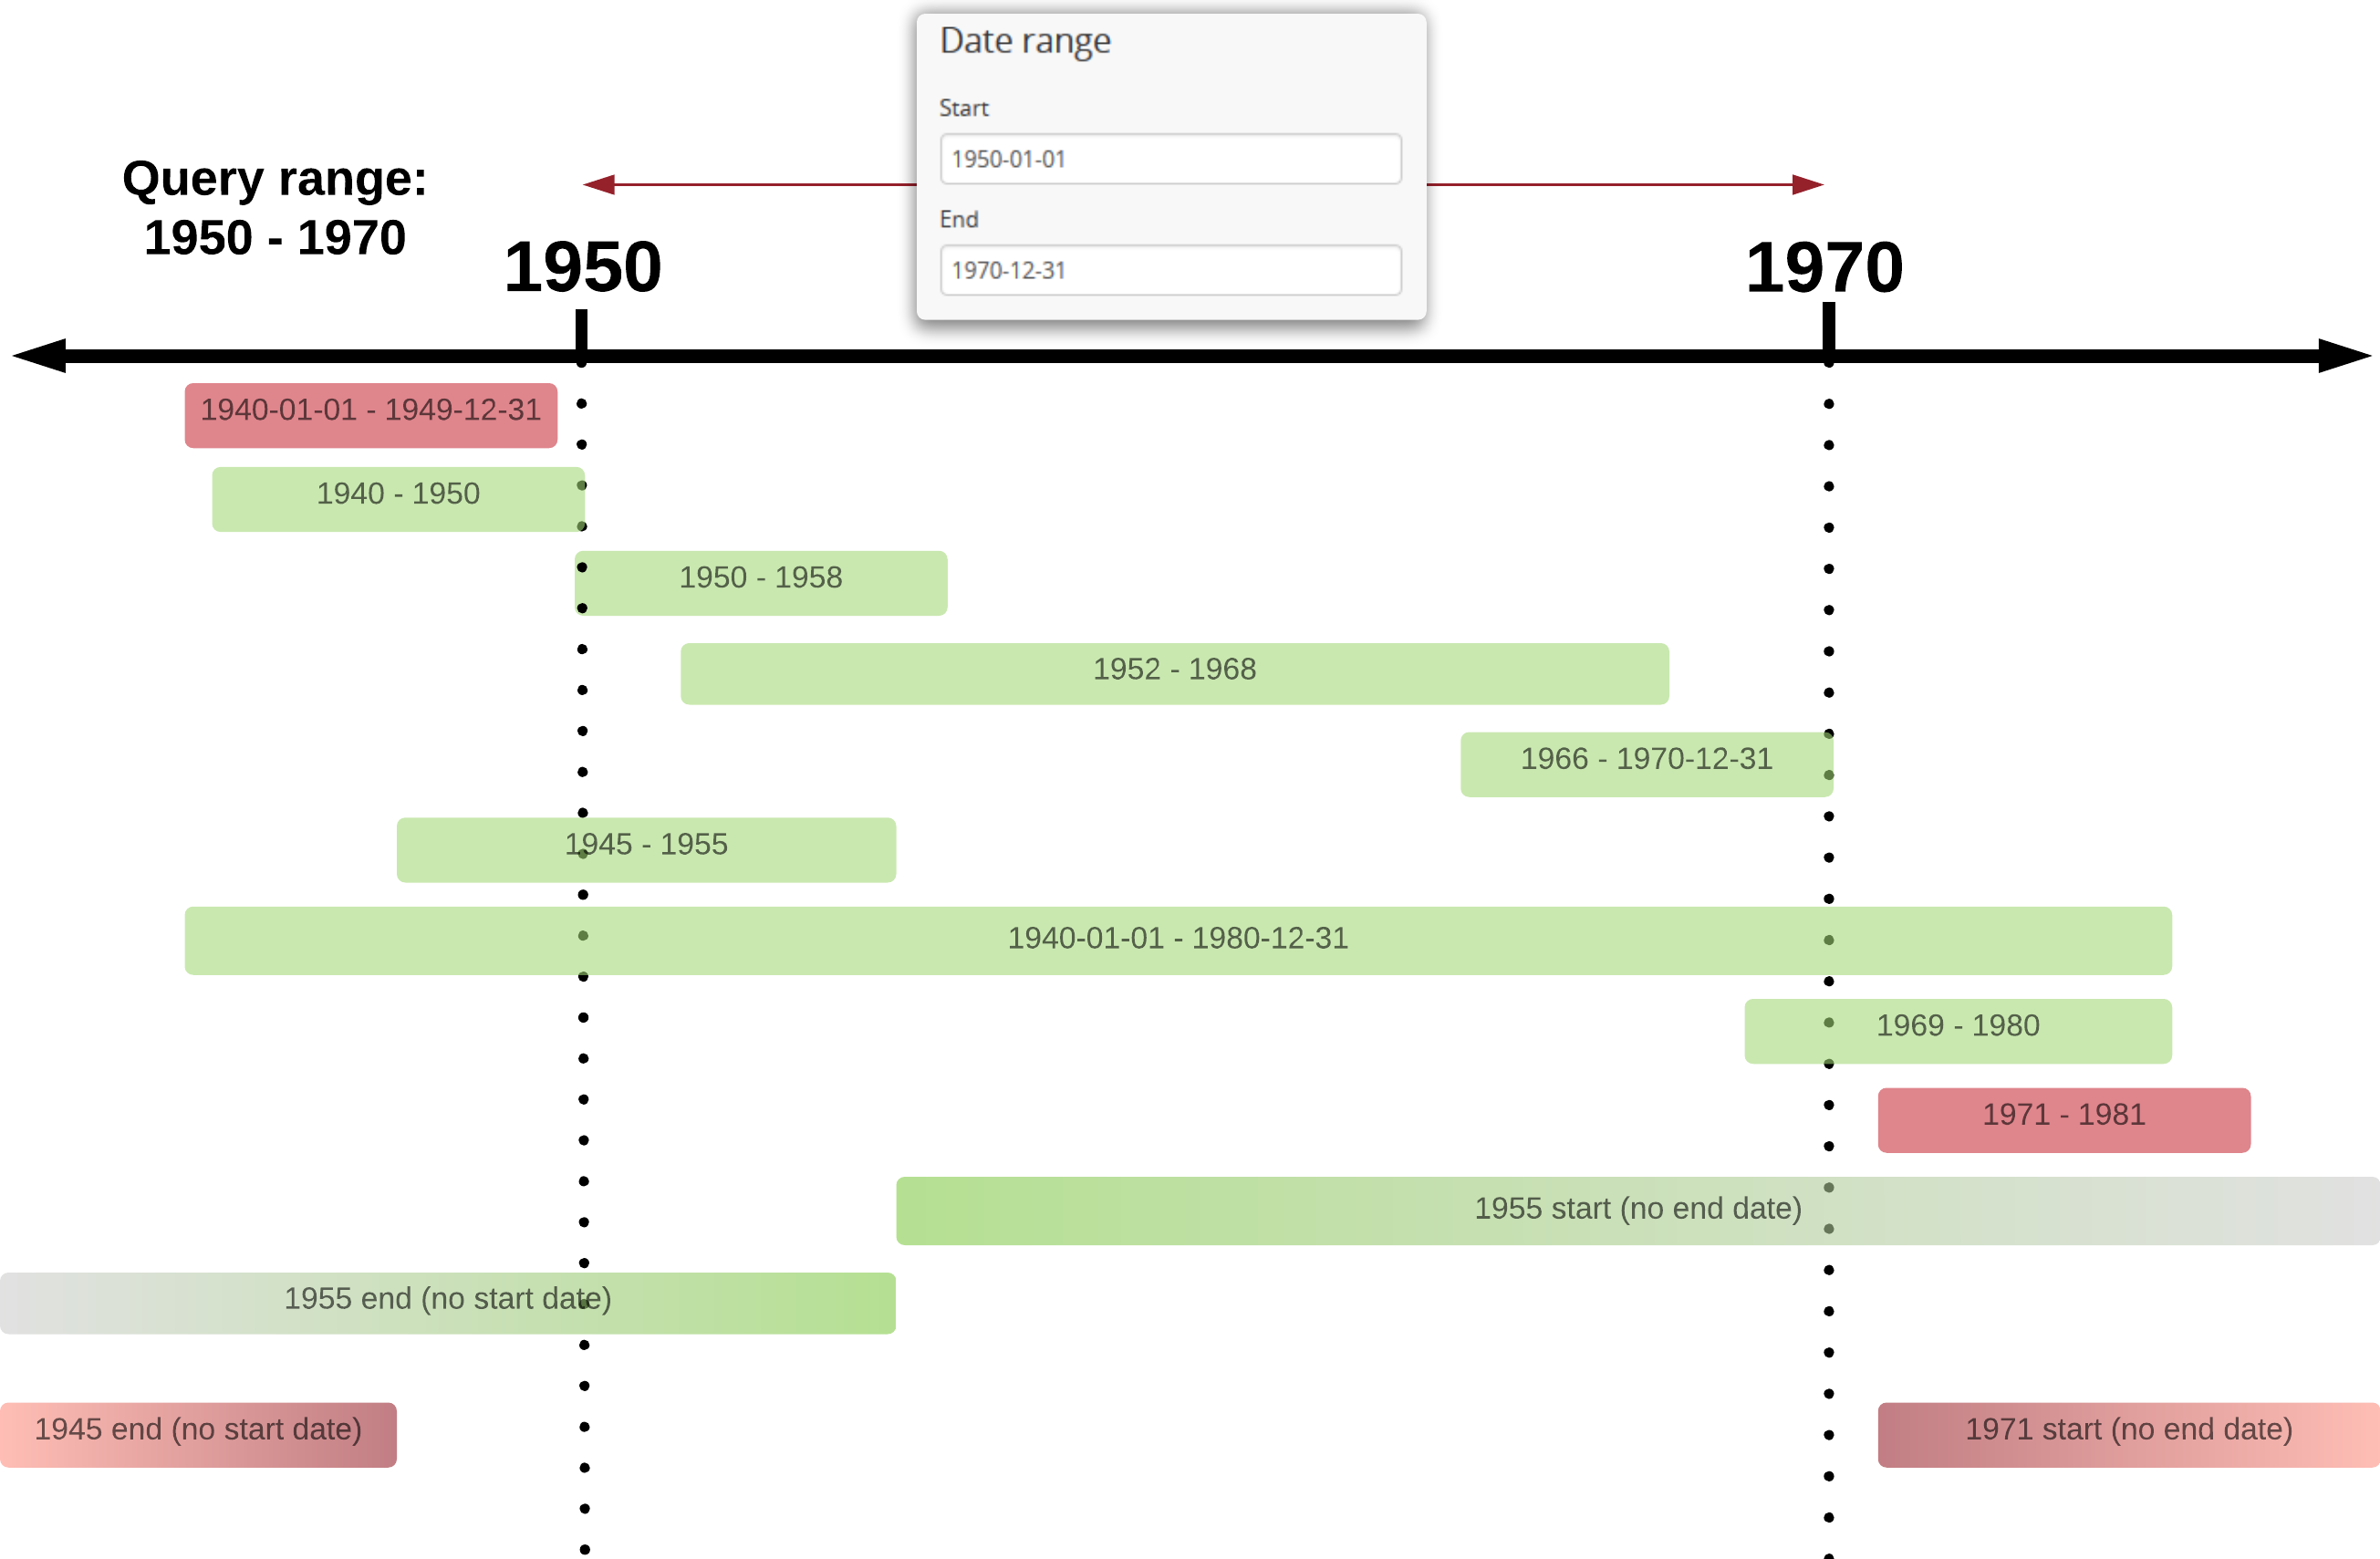 An example of results returned for a 1950-1970 query using the Overlap option